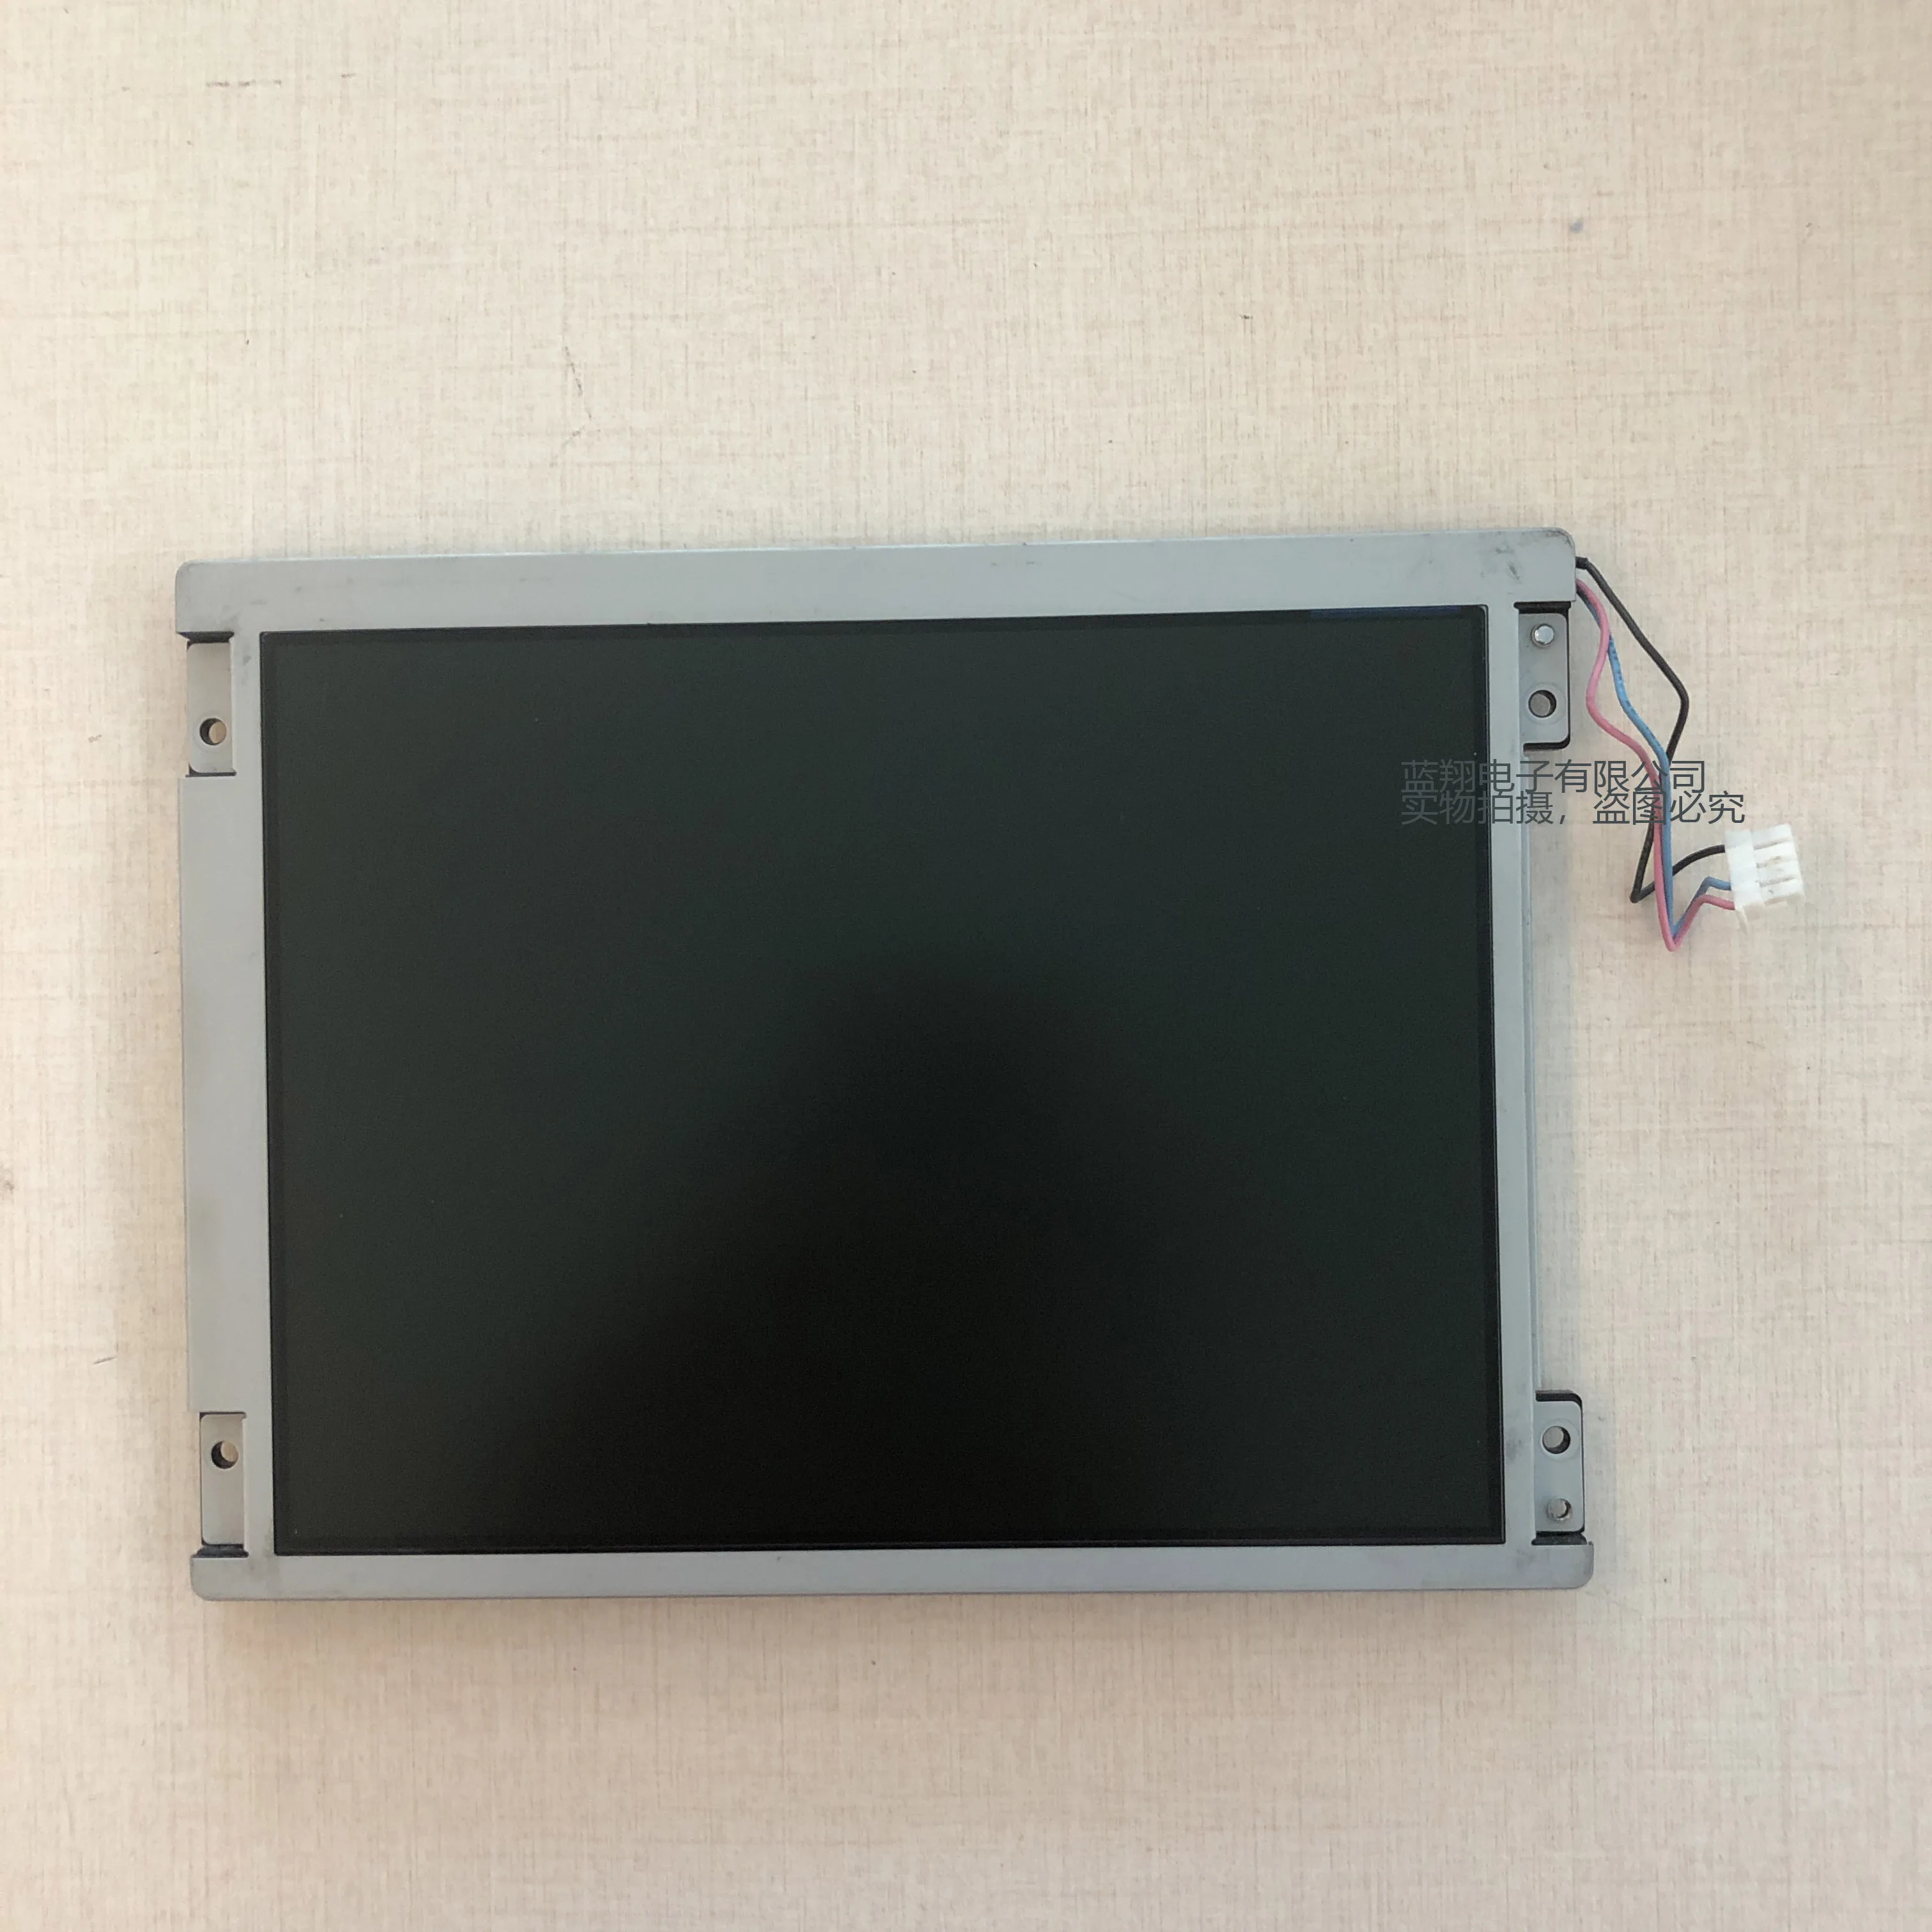 For 8.4inch LTA084C274F CCFL TFT Repair LCD Screen Display Panel Fully Tested Before Shipment